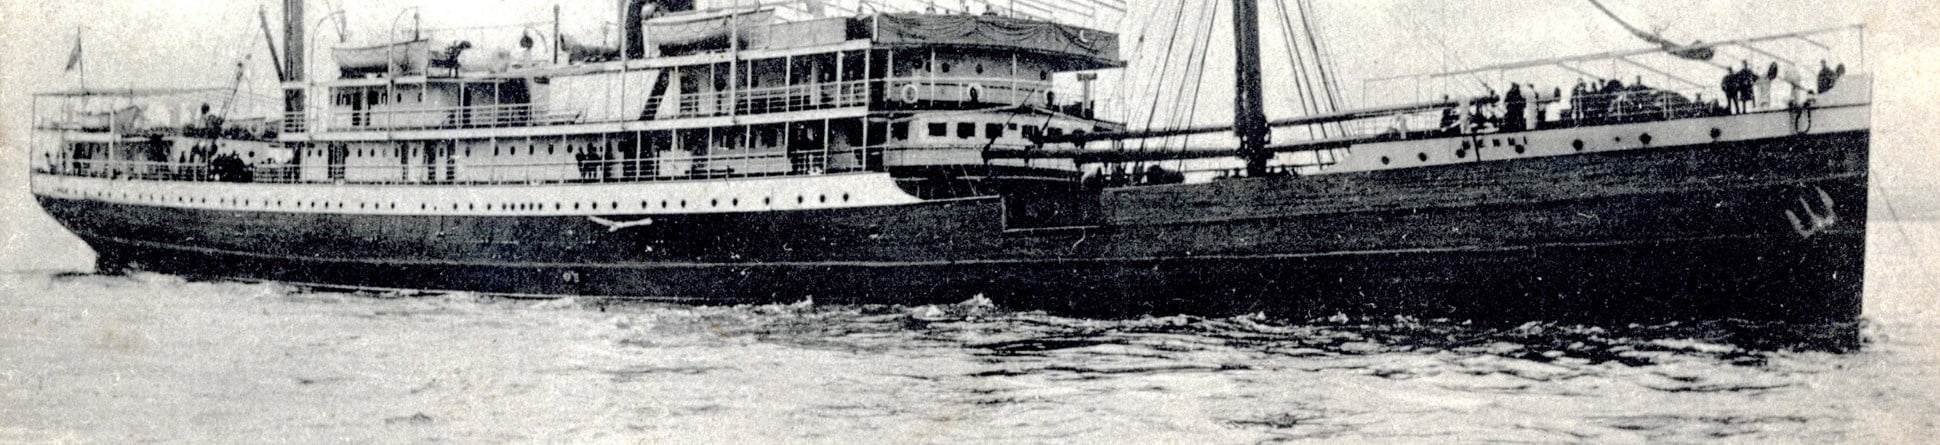 The Mendi was built in Glasgow and in 1905 registered to the British & African Steam Navigation Co Ltd. She is shown here in pre-war days in use as a mail ship. Image courtesy of the John Gribble Collection